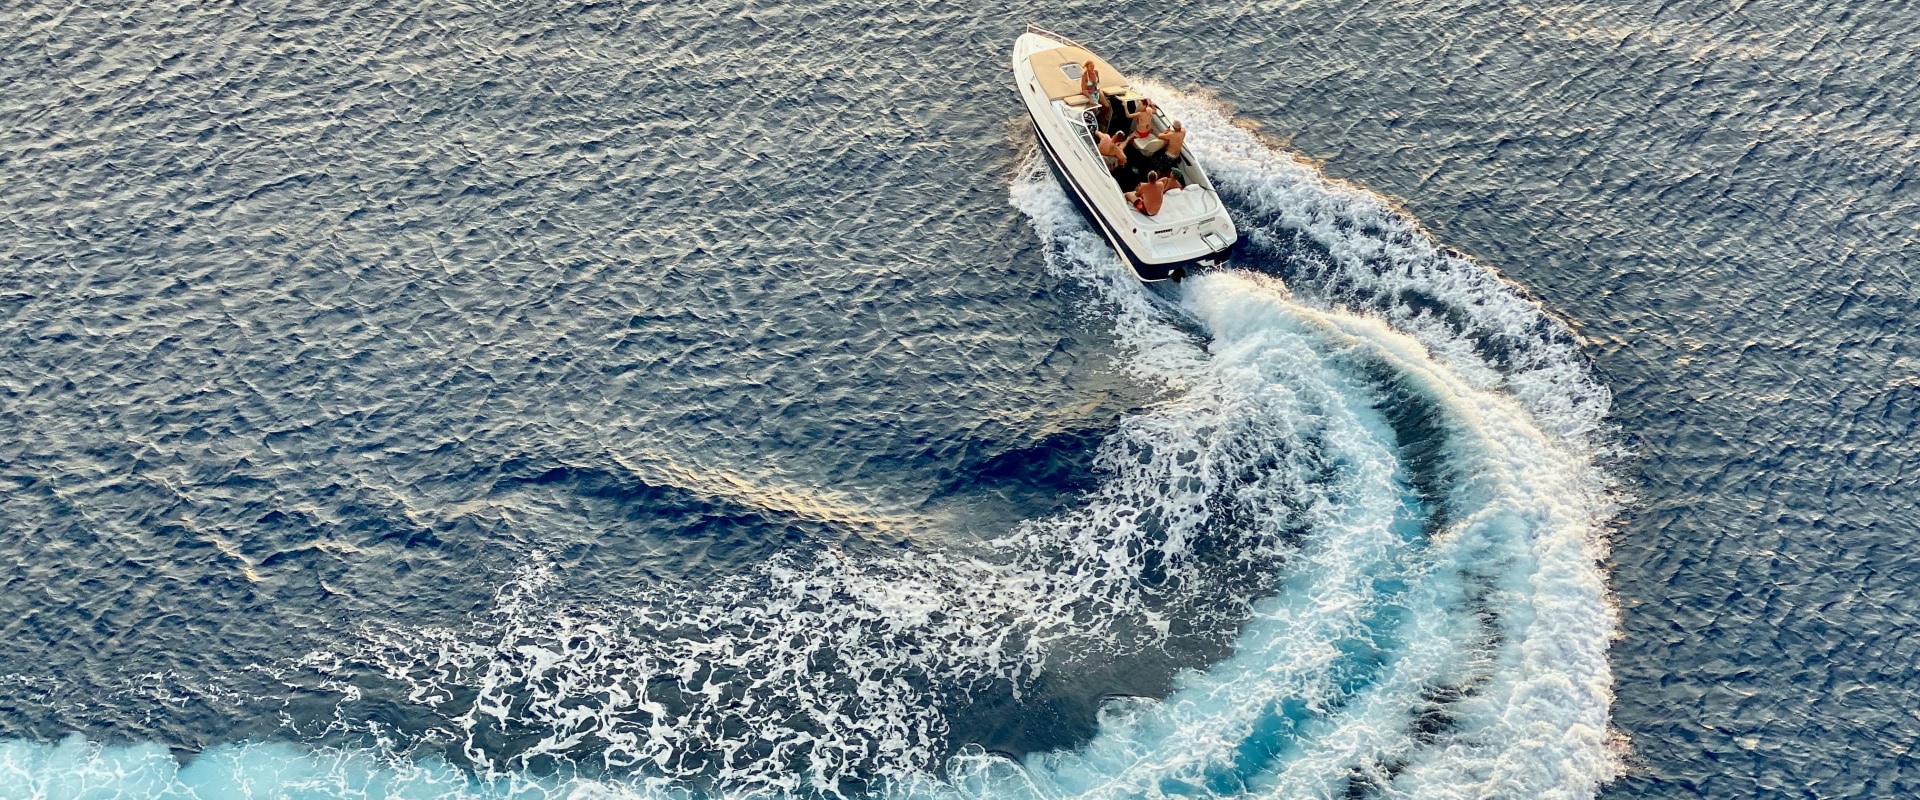 On-Water Towing and Assistance Coverage Explained